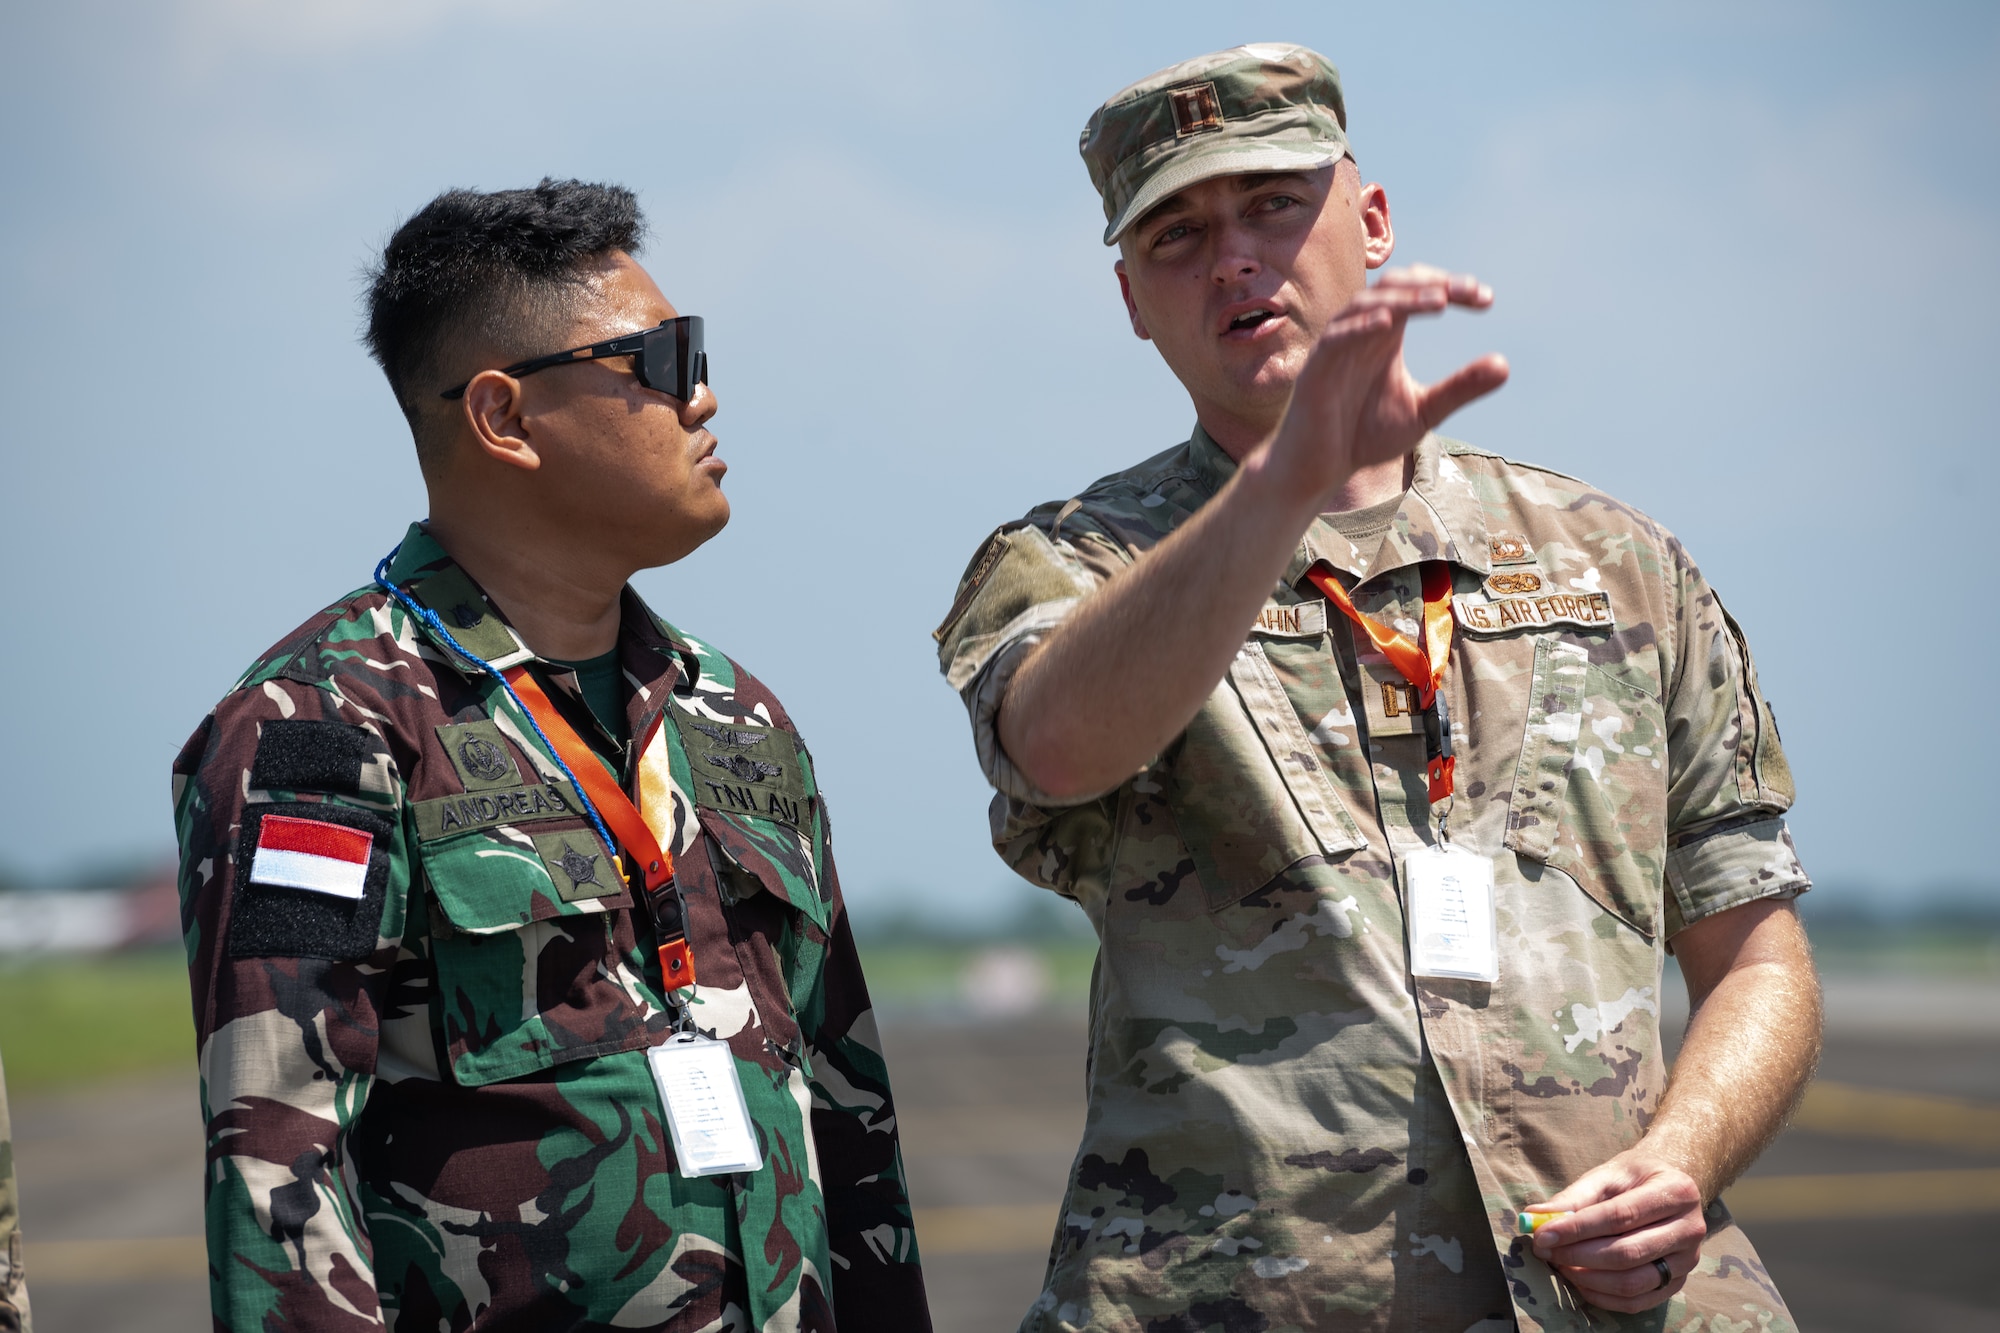 U.S. Air Force Capt. Dylon Schwahn, 5th Aircraft Maintenance Squadron, 23rd Aircraft Maintenance Unit officer in charge, explains B-52H Stratofortress maintenance procedures to a member of the Tentara Nasional Indonesia Angkatan Udara, or Indonesian Air Force, during a bilateral training exercise at the Kualanamu International Airport in Medan, Indonesia, June 19, 2023. Bilateral training exercises such as this enhance interoperability between the U.S. and Indonesian air forces and contribute to the long-term advancement of the nations’ shared interests. (U.S. Air Force photo by Tech. Sgt. Zade Vadnais)